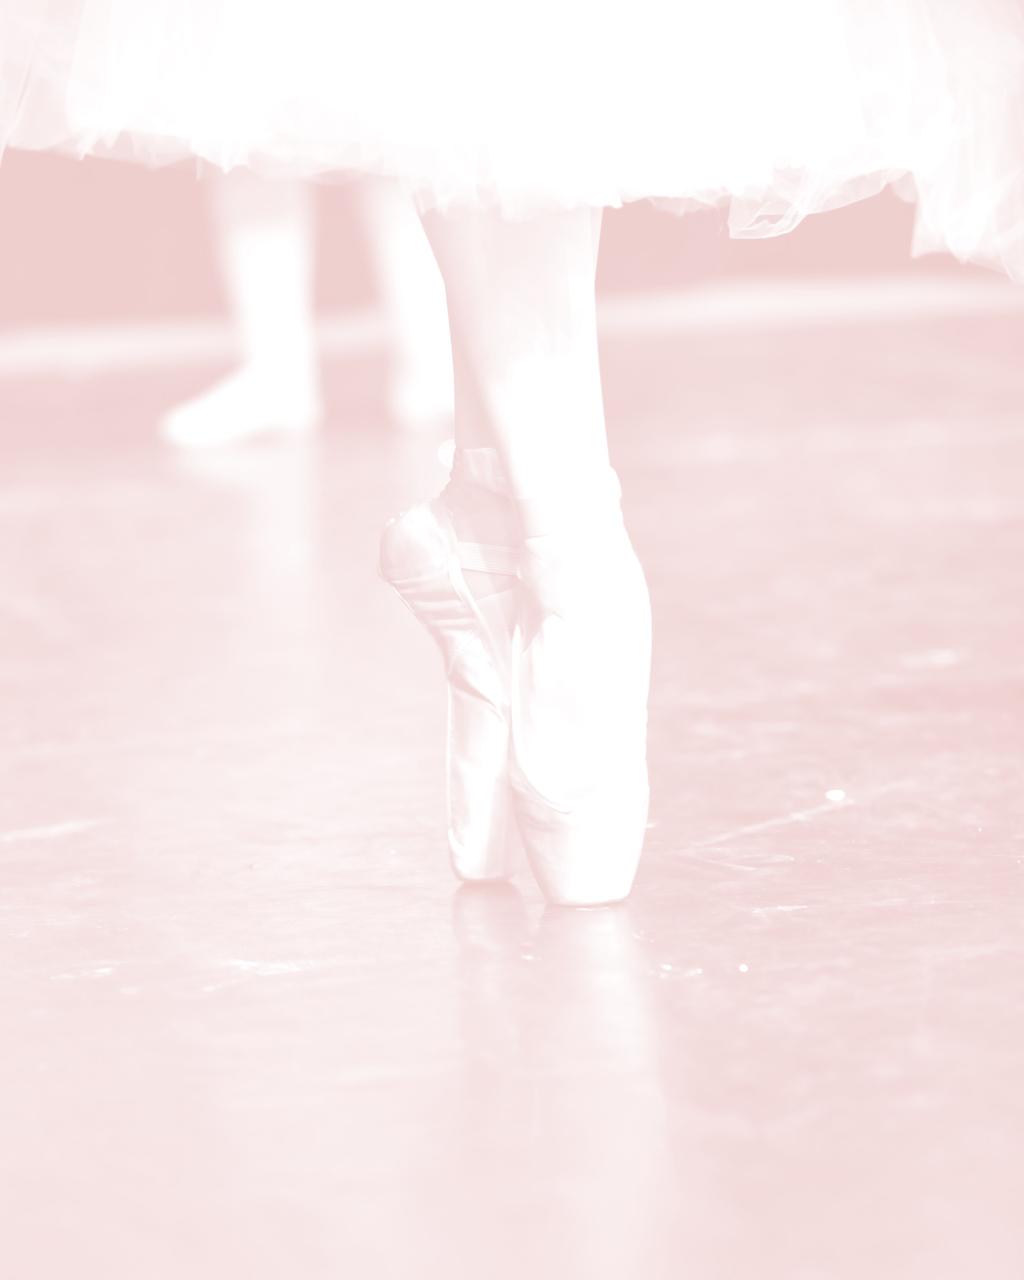 FSPA Summer Ballet Intensives Intermediate/ Advanced Intensive Pre-Professional Program FSPA Conservatory Levels III/IV/V/VI, or by audition Ages 12+ July 3-28 (4 weeks) Monday-Friday 9:30-3:30 Young